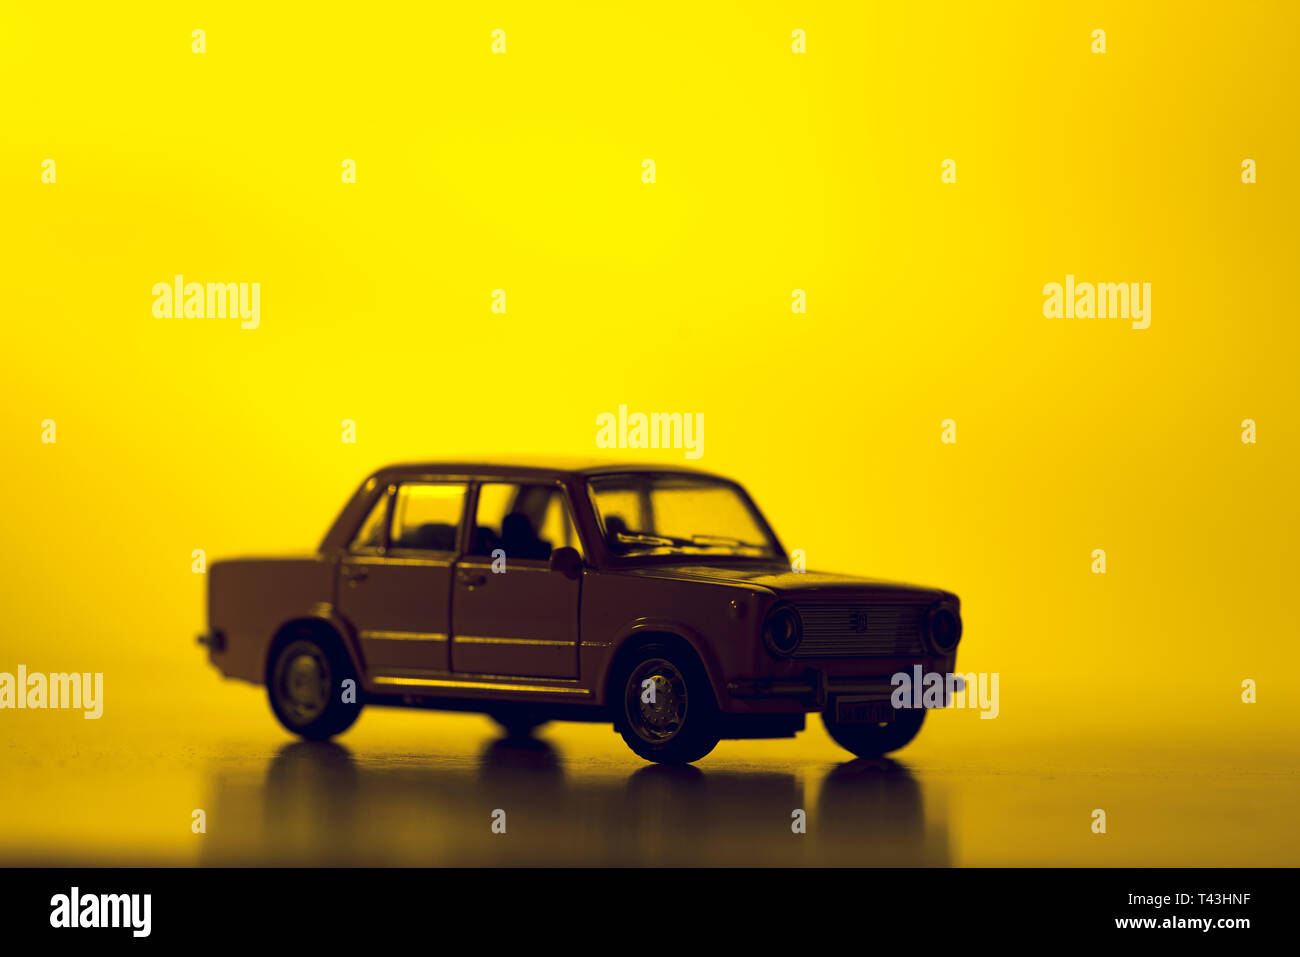 Izmir, Turkey - December 15, 2018: Silhouette toy car on a vibrant red background. Stock Photo